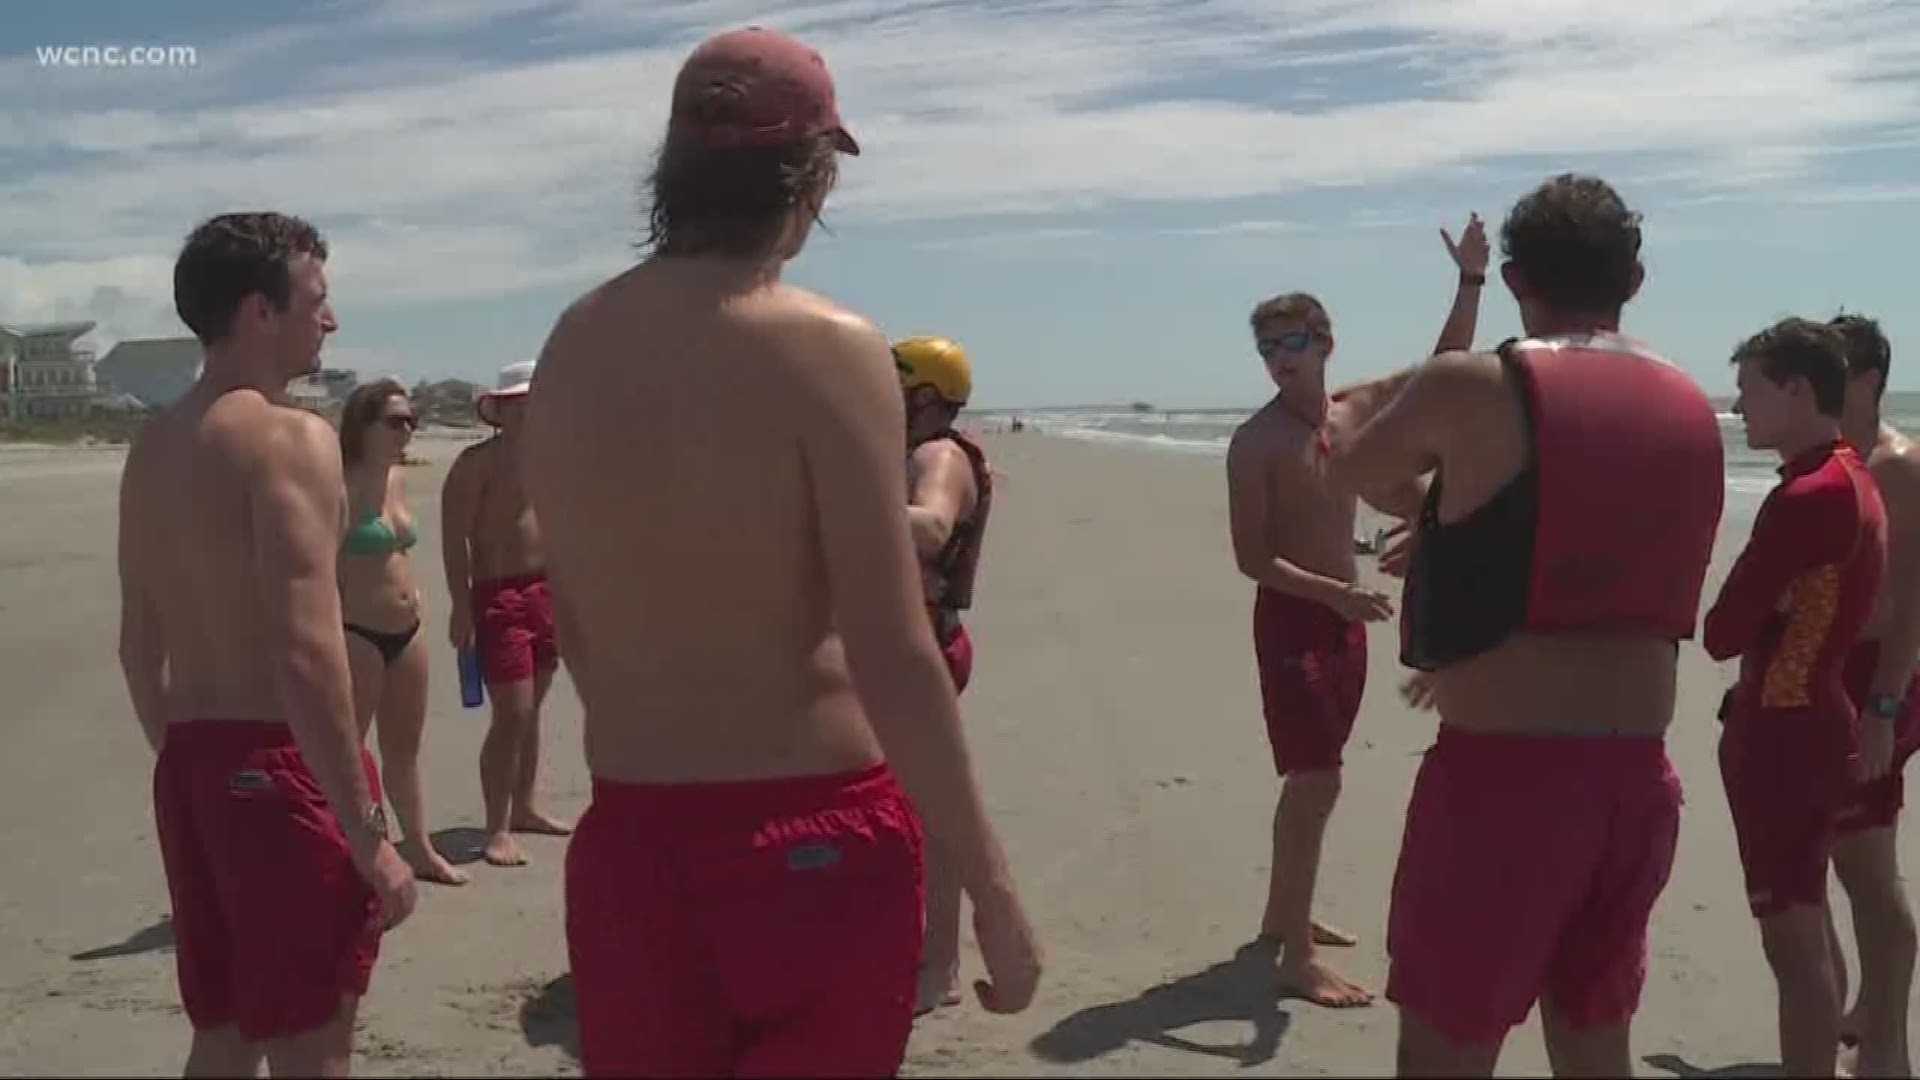 Millions travel to the Carolina coast every year and with the first summer holiday weekend on deck, lifeguards at Folly Beach spent Friday perfecting their skills.